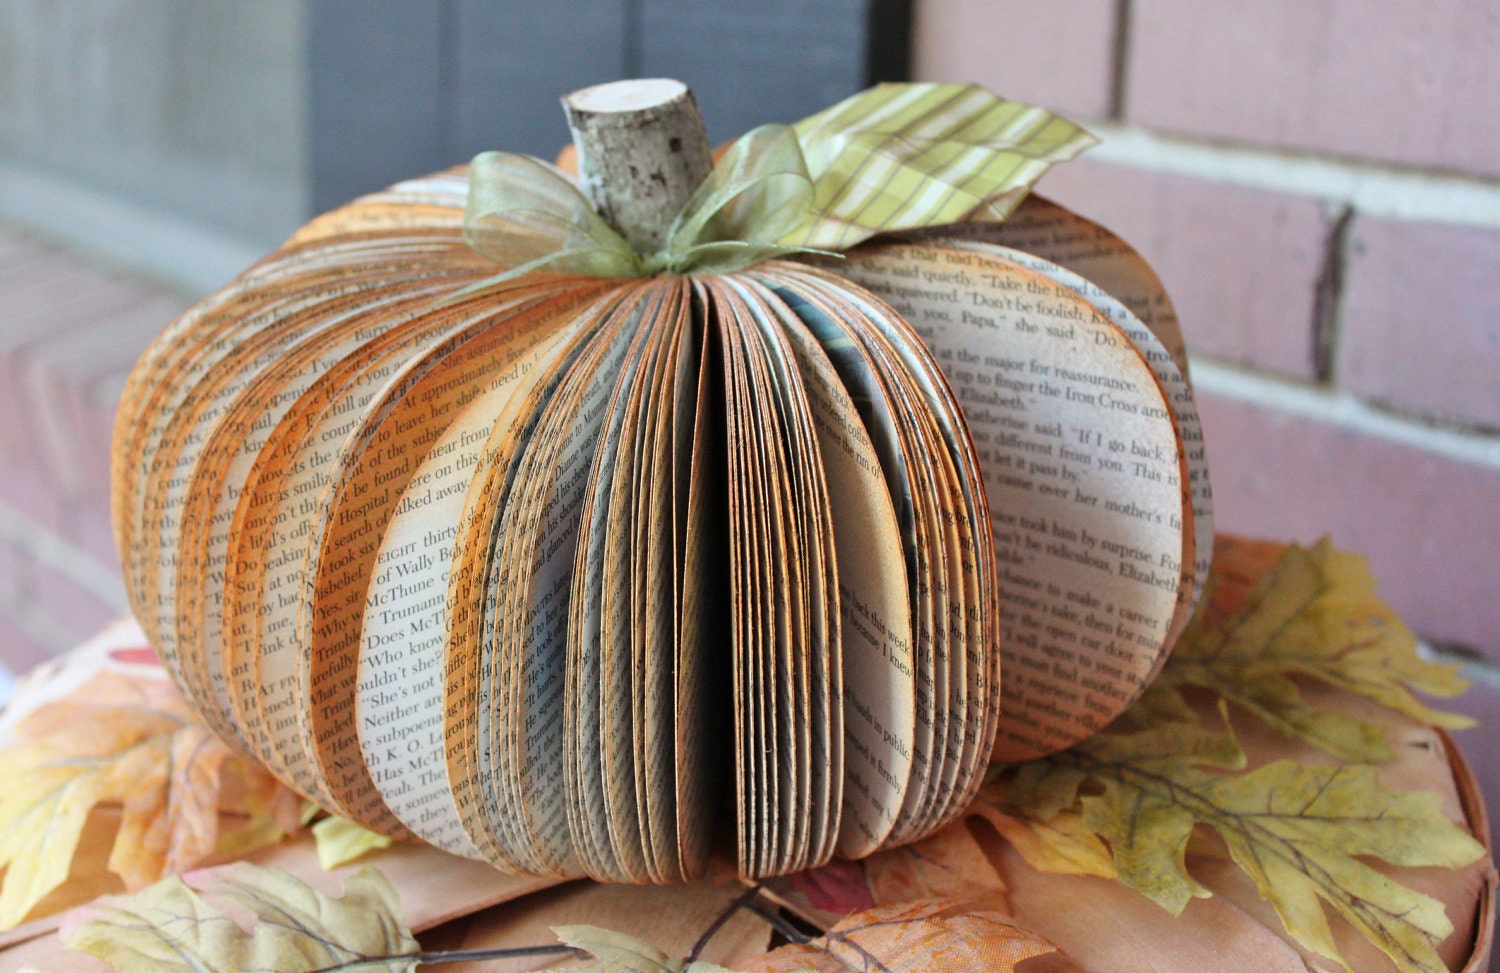 Upcycled Book Pumpkin MADE TO ORDER (as featured in Better Homes & Gardens Holiday Craft issue 2012) - whimsysworkshop